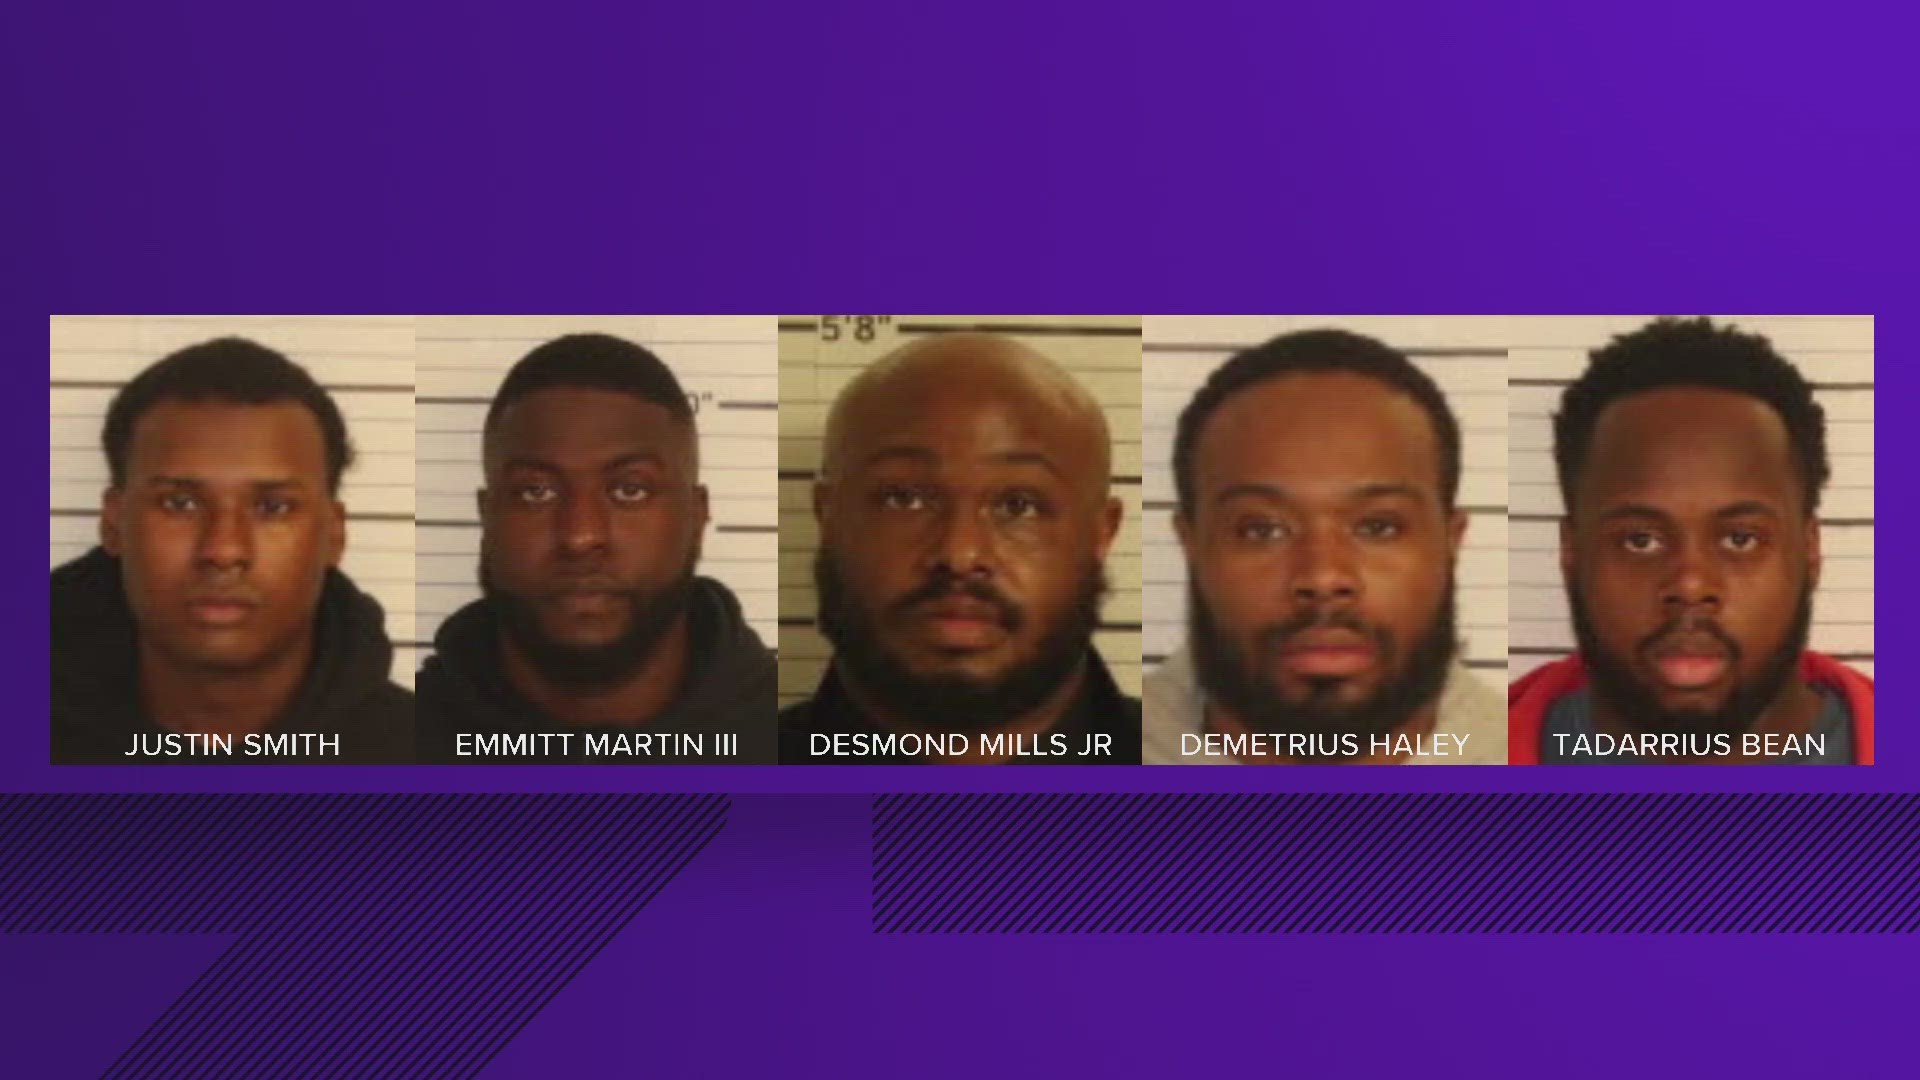 The former MPD officers were indicted by a federal grand jury on Sept. 13 on charges of using excessive force and conspiring to lie about the beating.